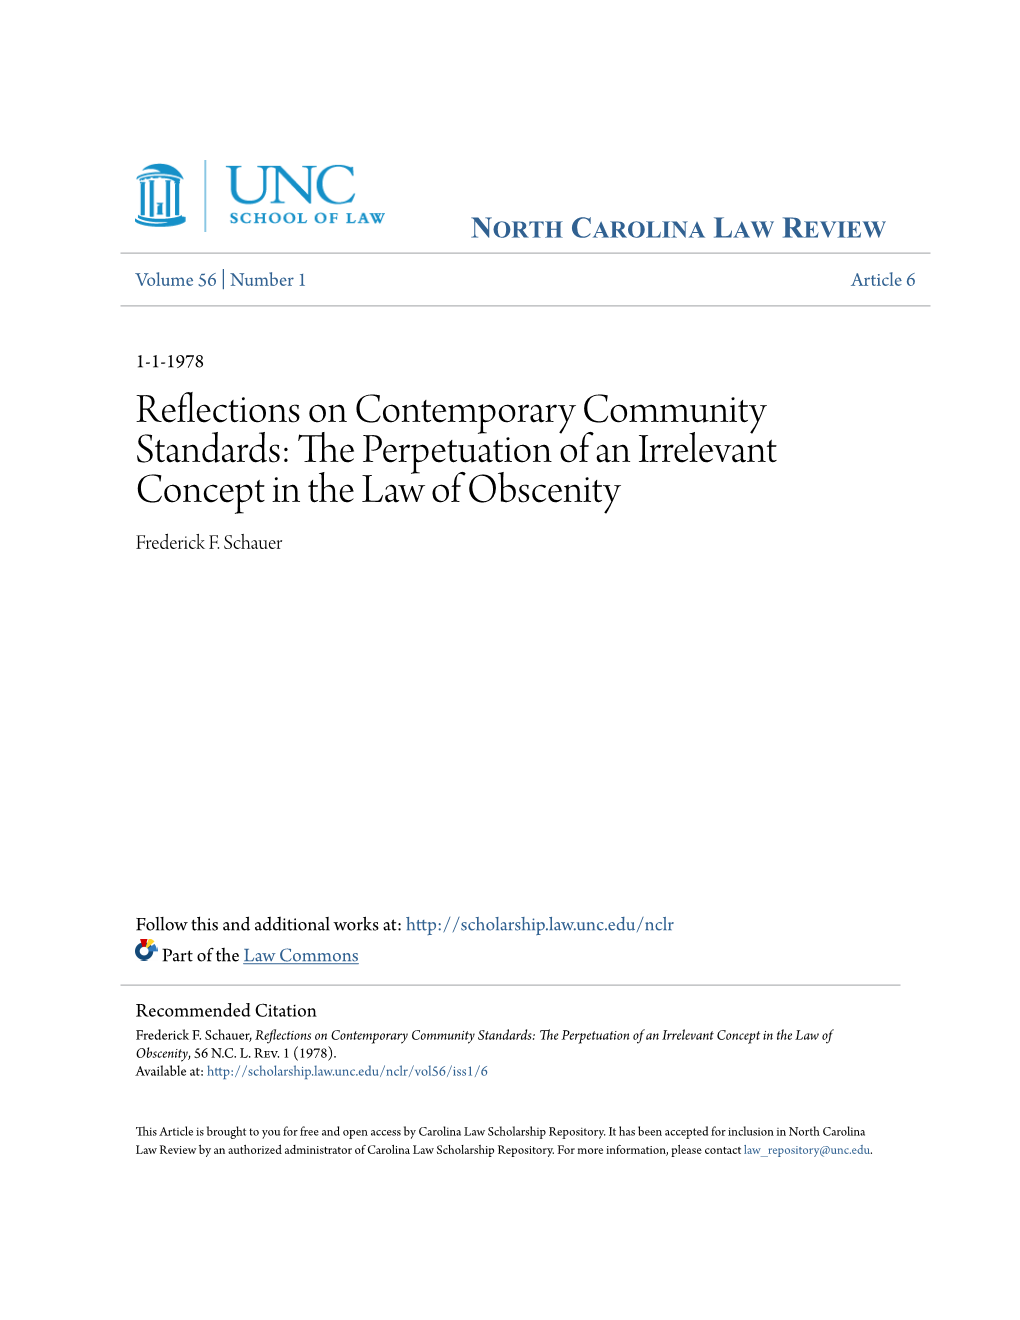 Reflections on Contemporary Community Standards: the Ep Rpetuation of an Irrelevant Concept in the Law of Obscenity Frederick F